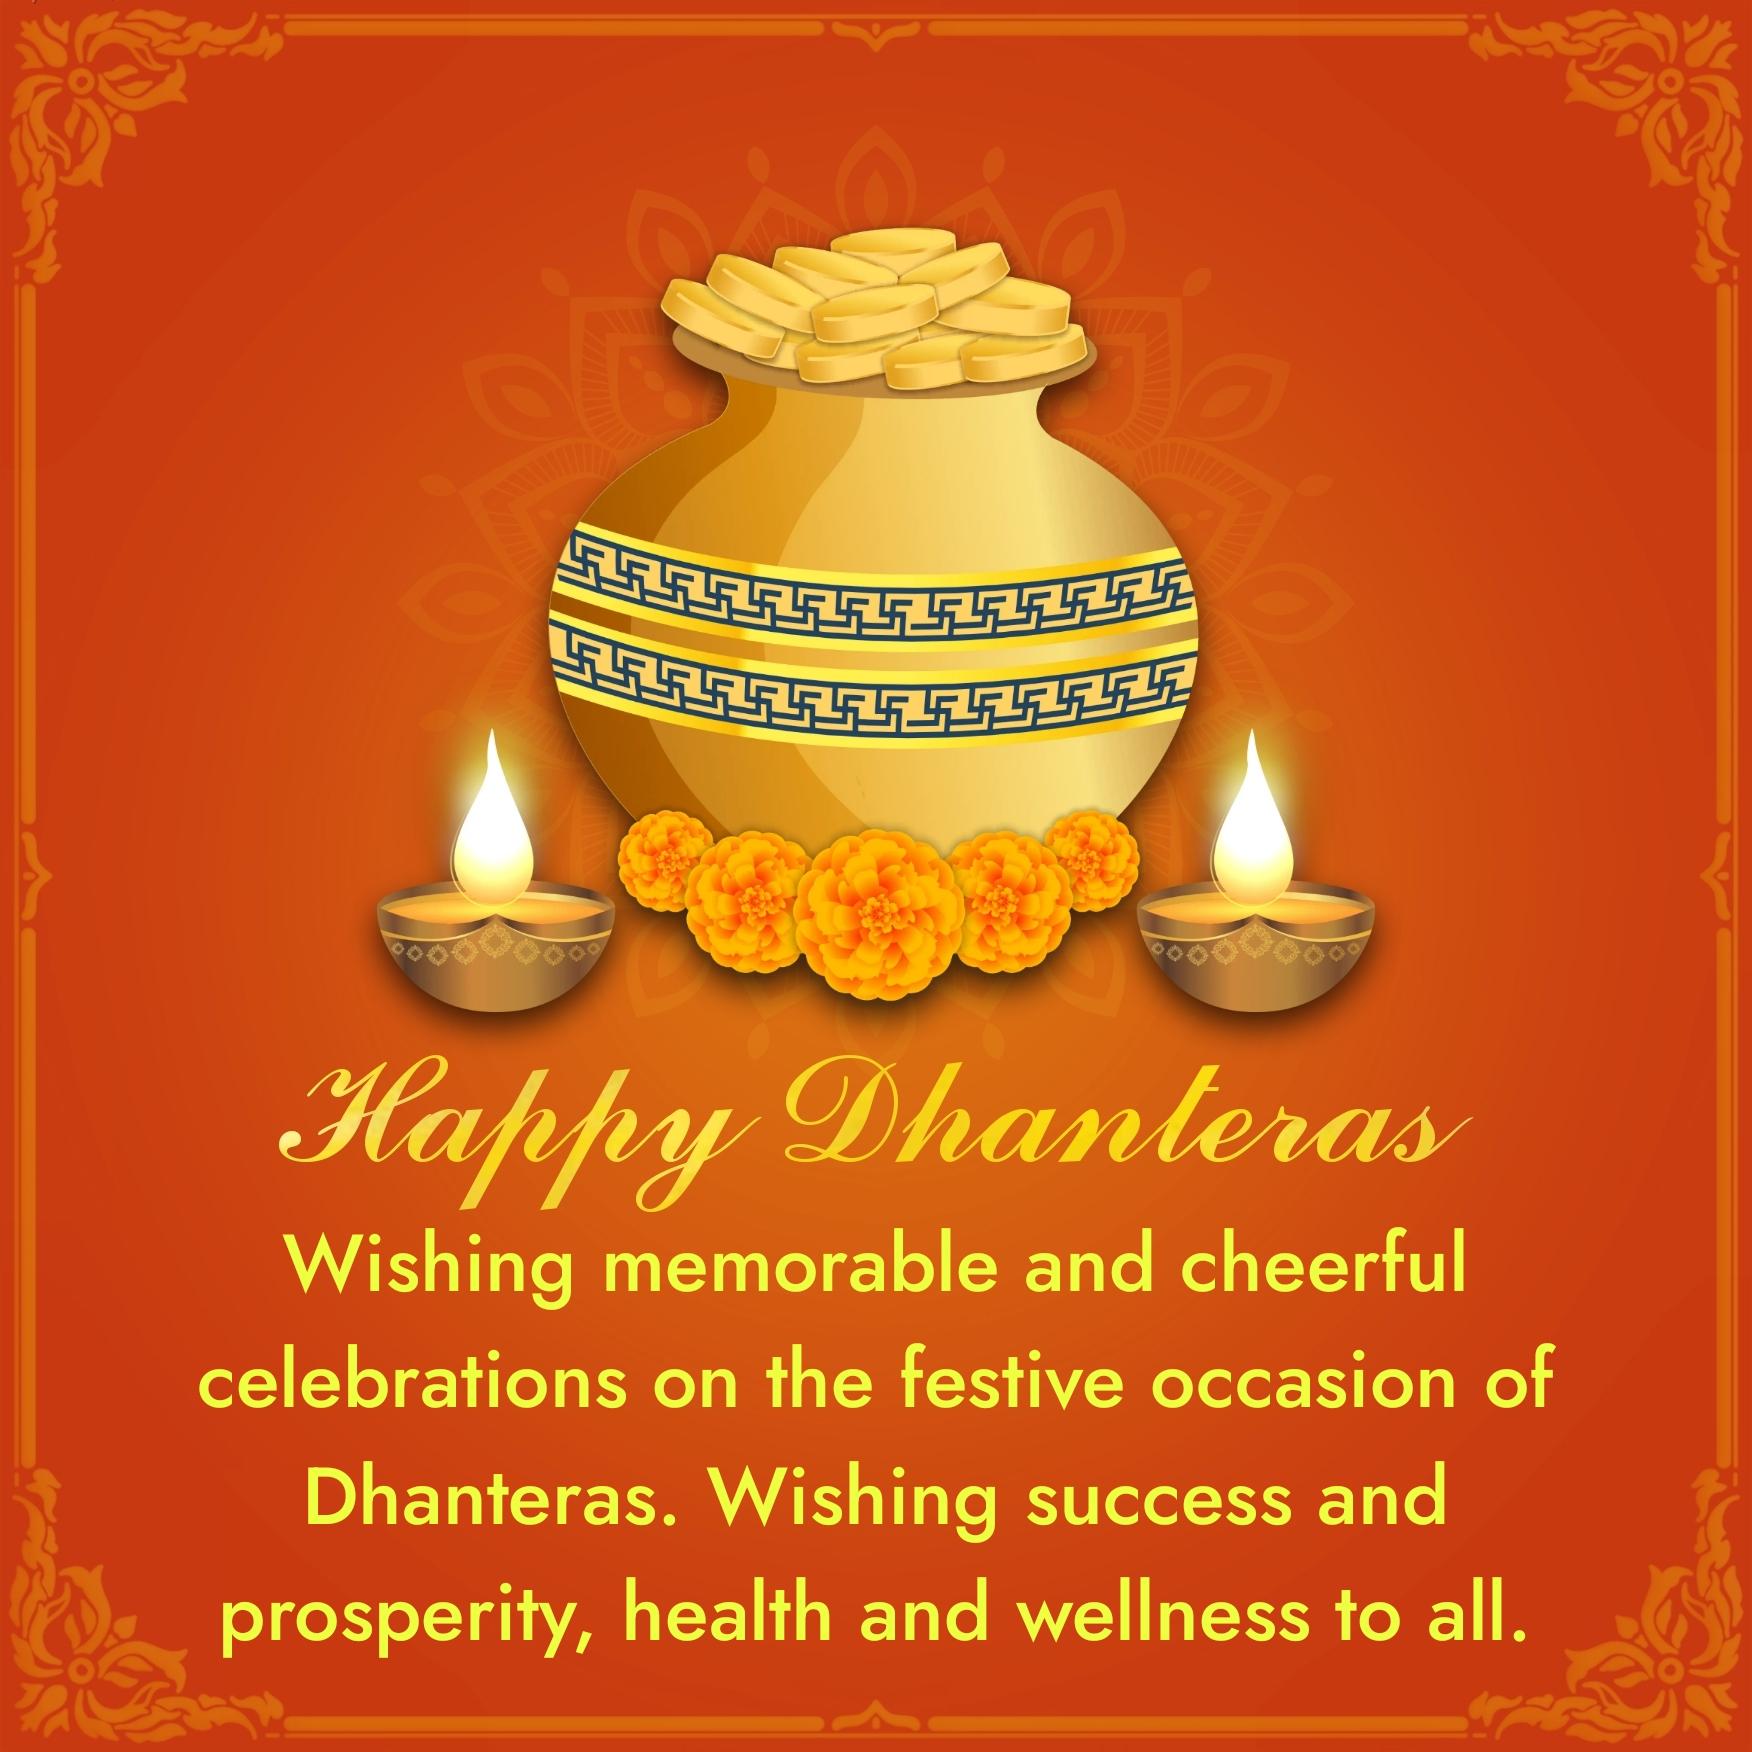 Wishing memorable and cheerful celebrations